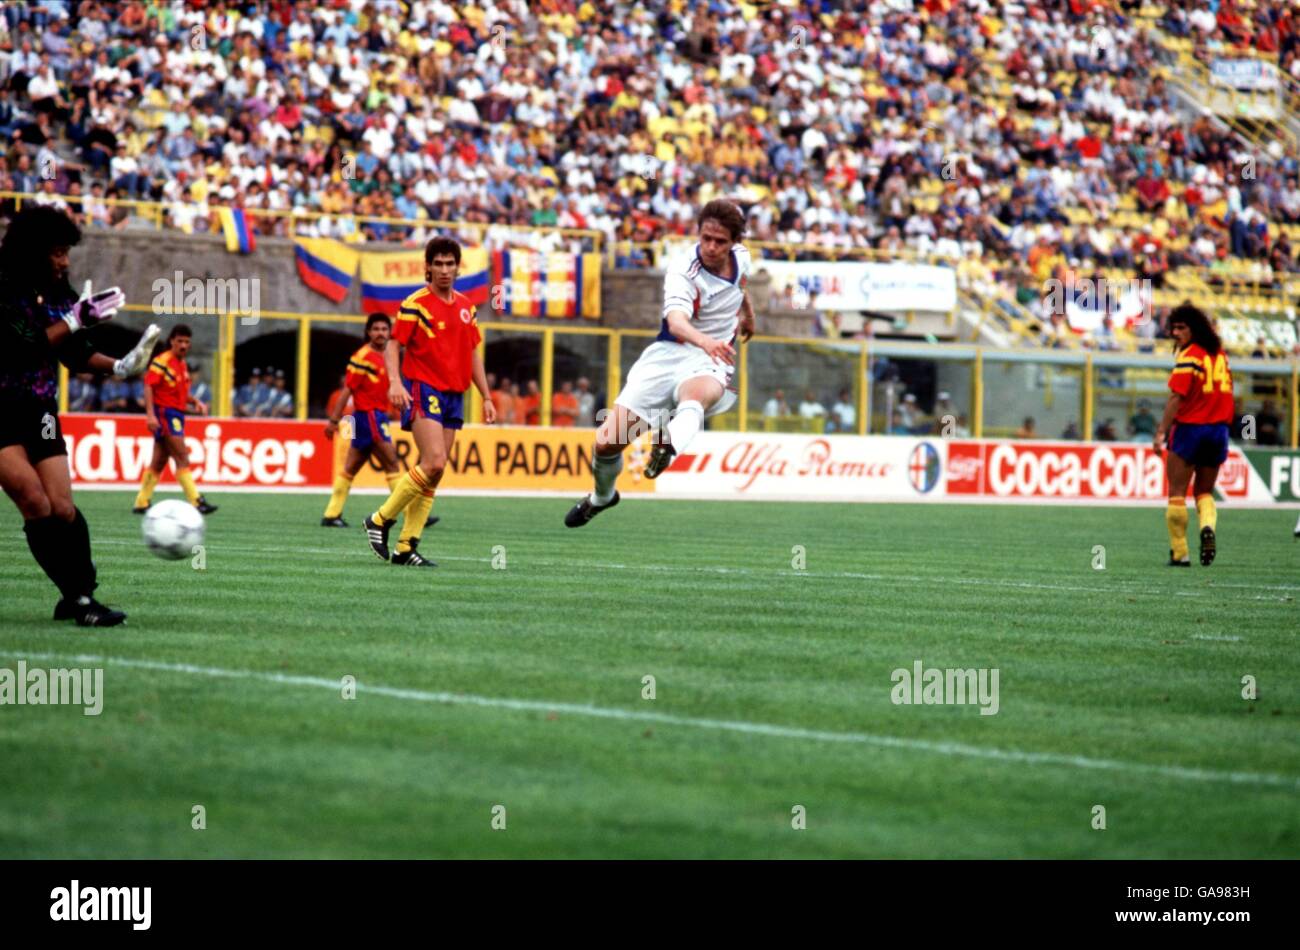 Yugoslavia's Dragan Stojkovic (c) lashes the ball at goal after play stopped, watched by Colombia's Andres Escobar (no2) Stock Photo